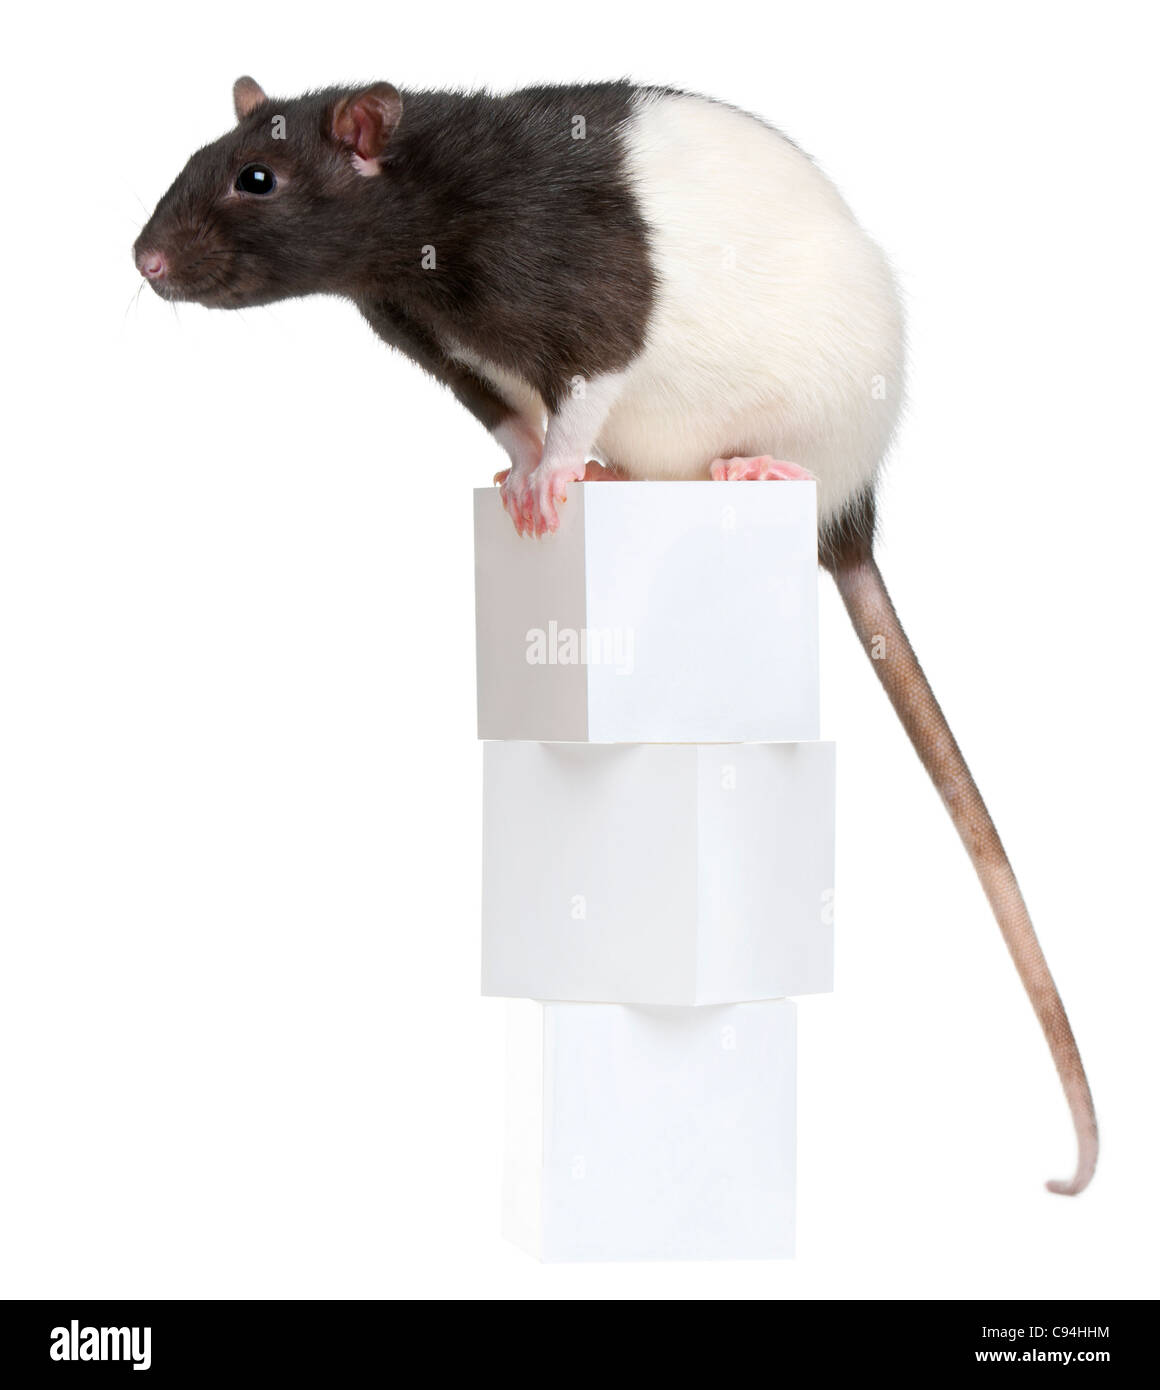 Fancy Rat, 1 year old, sitting on boxes in front of white background Stock Photo